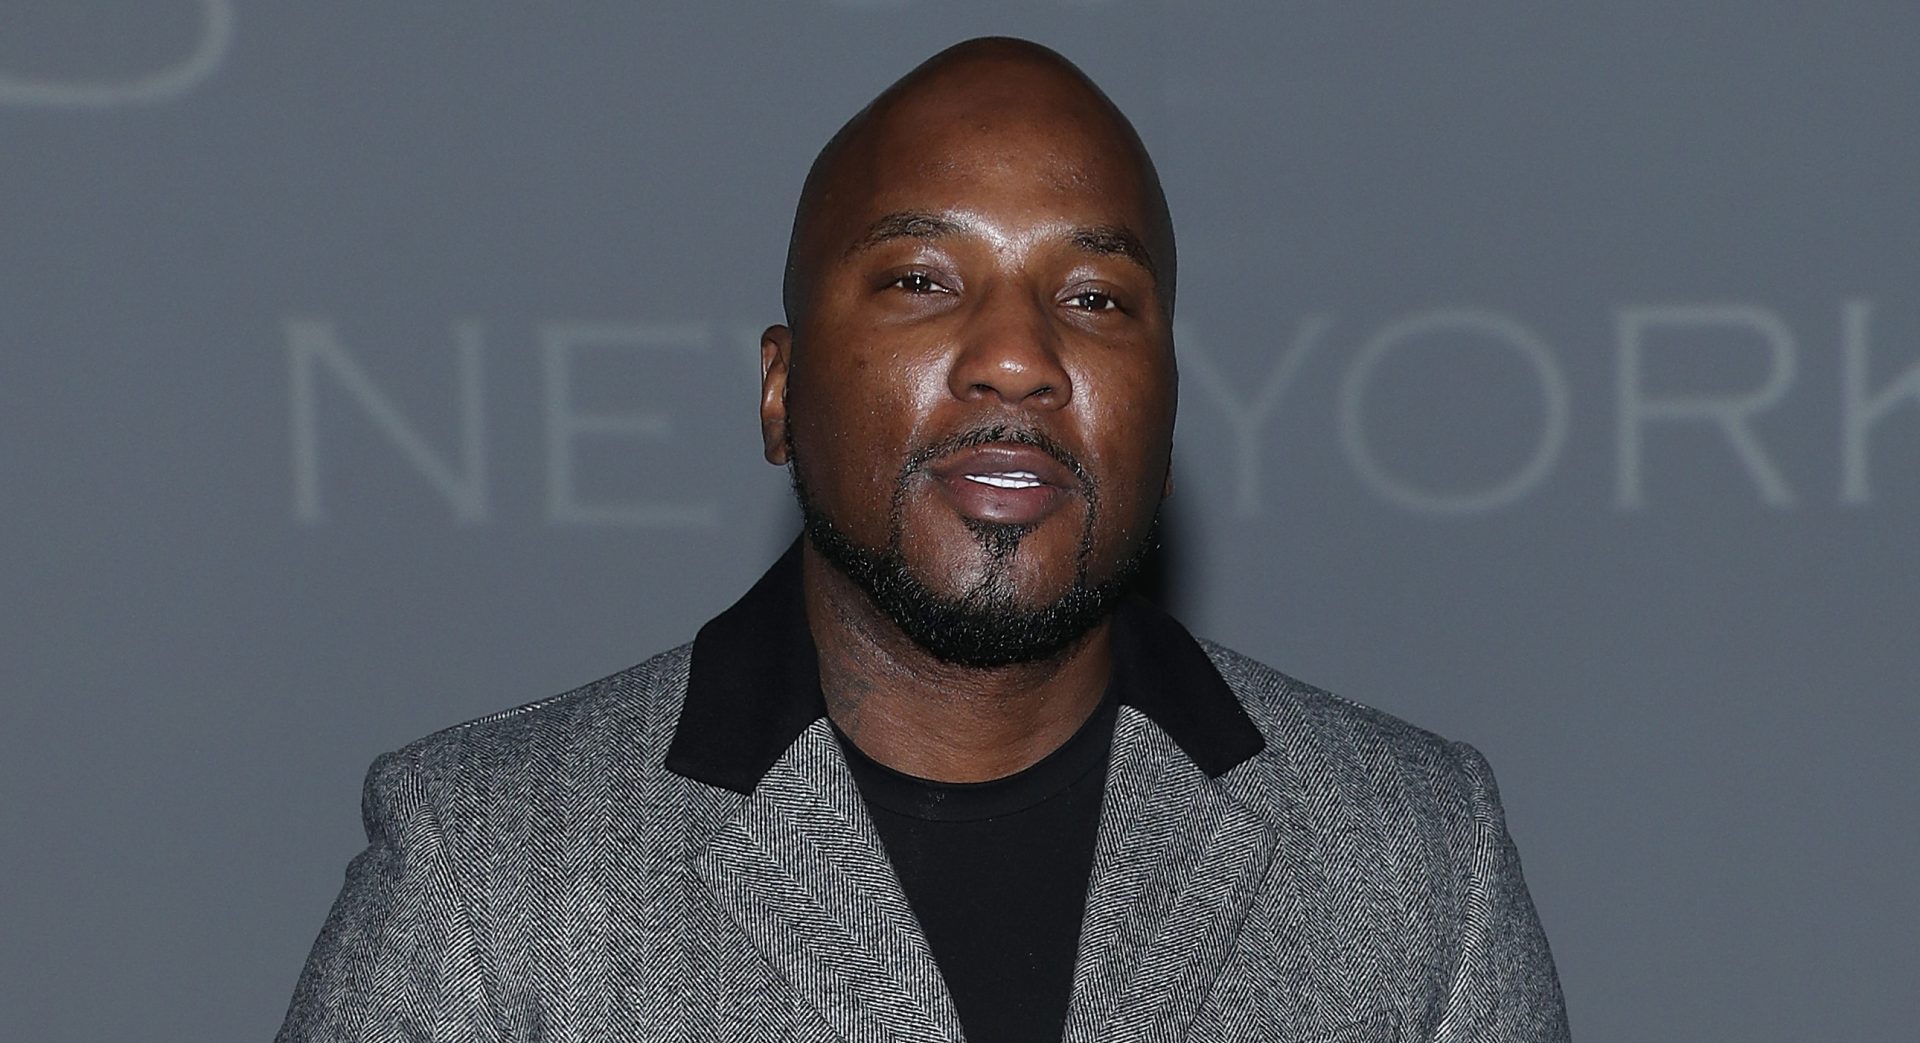 Social media applauds Jeezy after he talks about depression for 8 years: a 'powerful testimony'